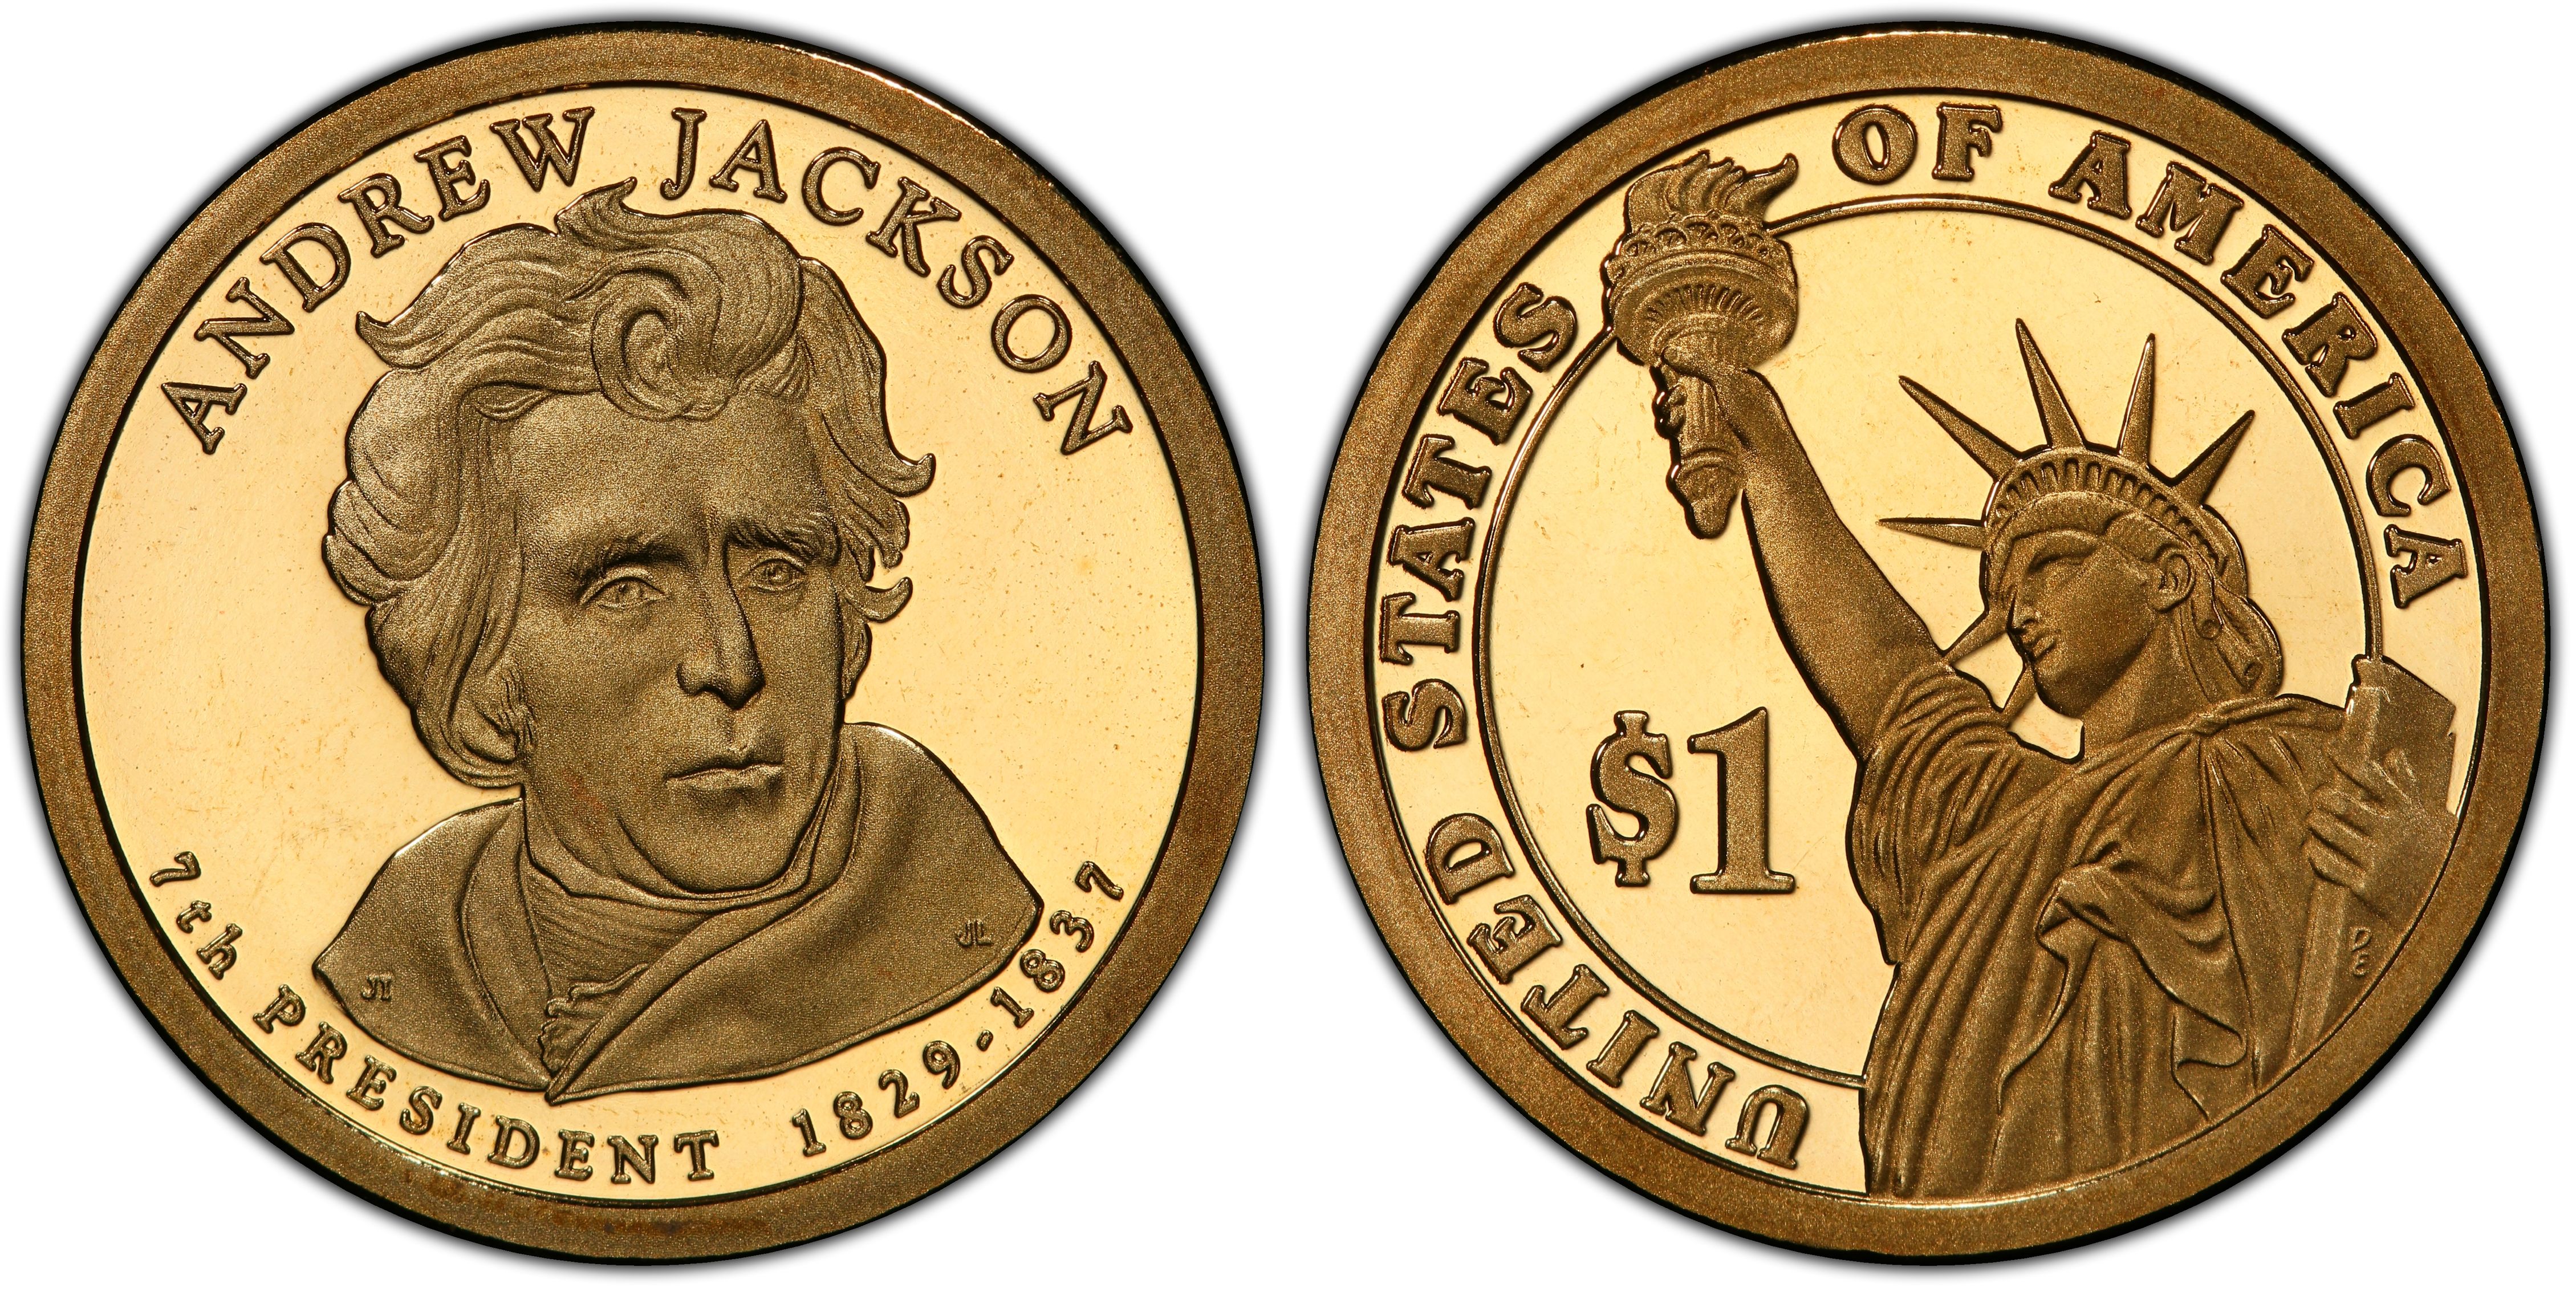 Andrew Jackson Colored Painted Colorized Presidential Dollar Coin 2008 